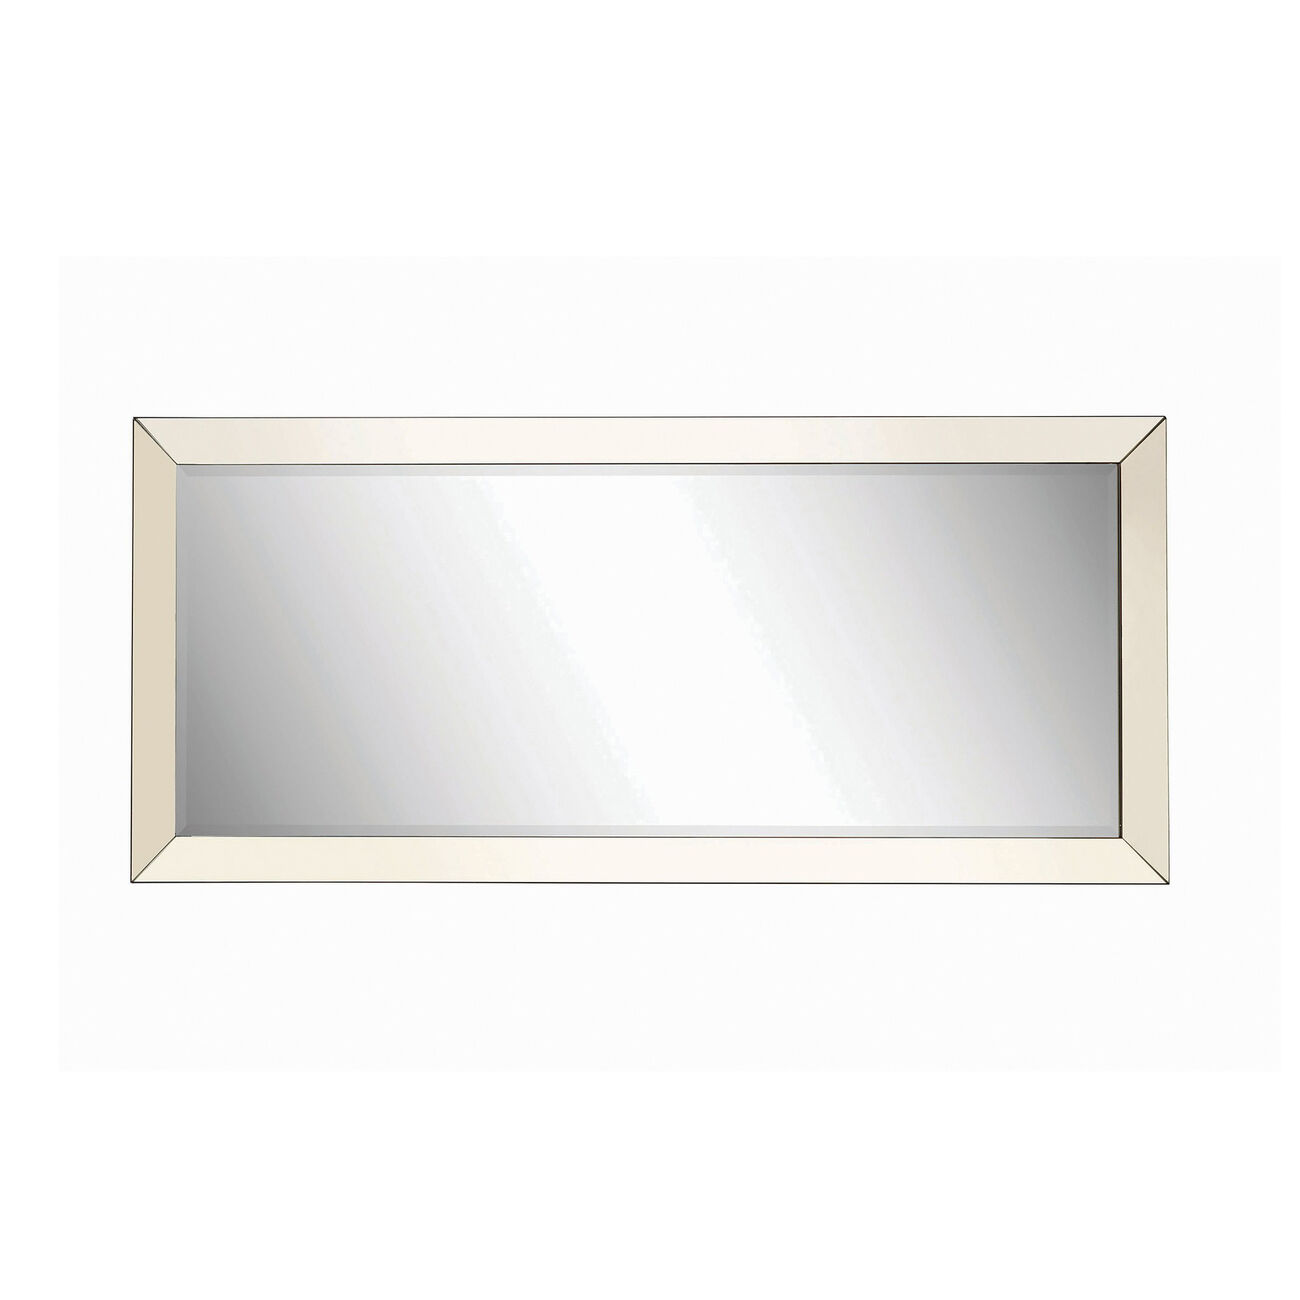 Rectangular Shaped Floor Mirror with Beveled Edge, Silver